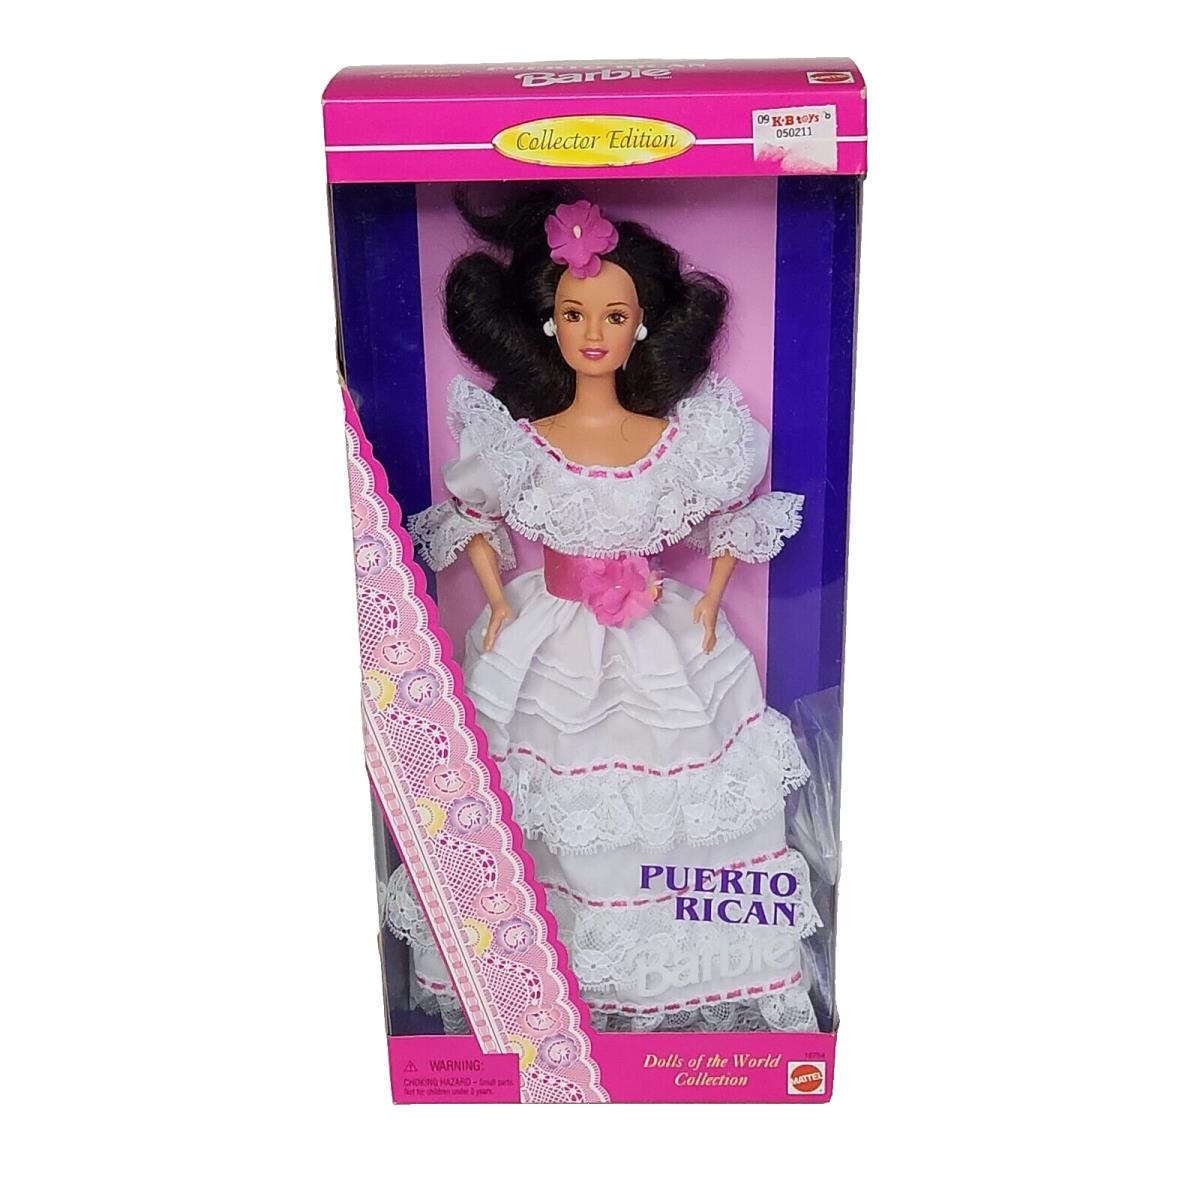 Vintage 1996 Puerto Rican Barbie Doll OF The World Box 16754